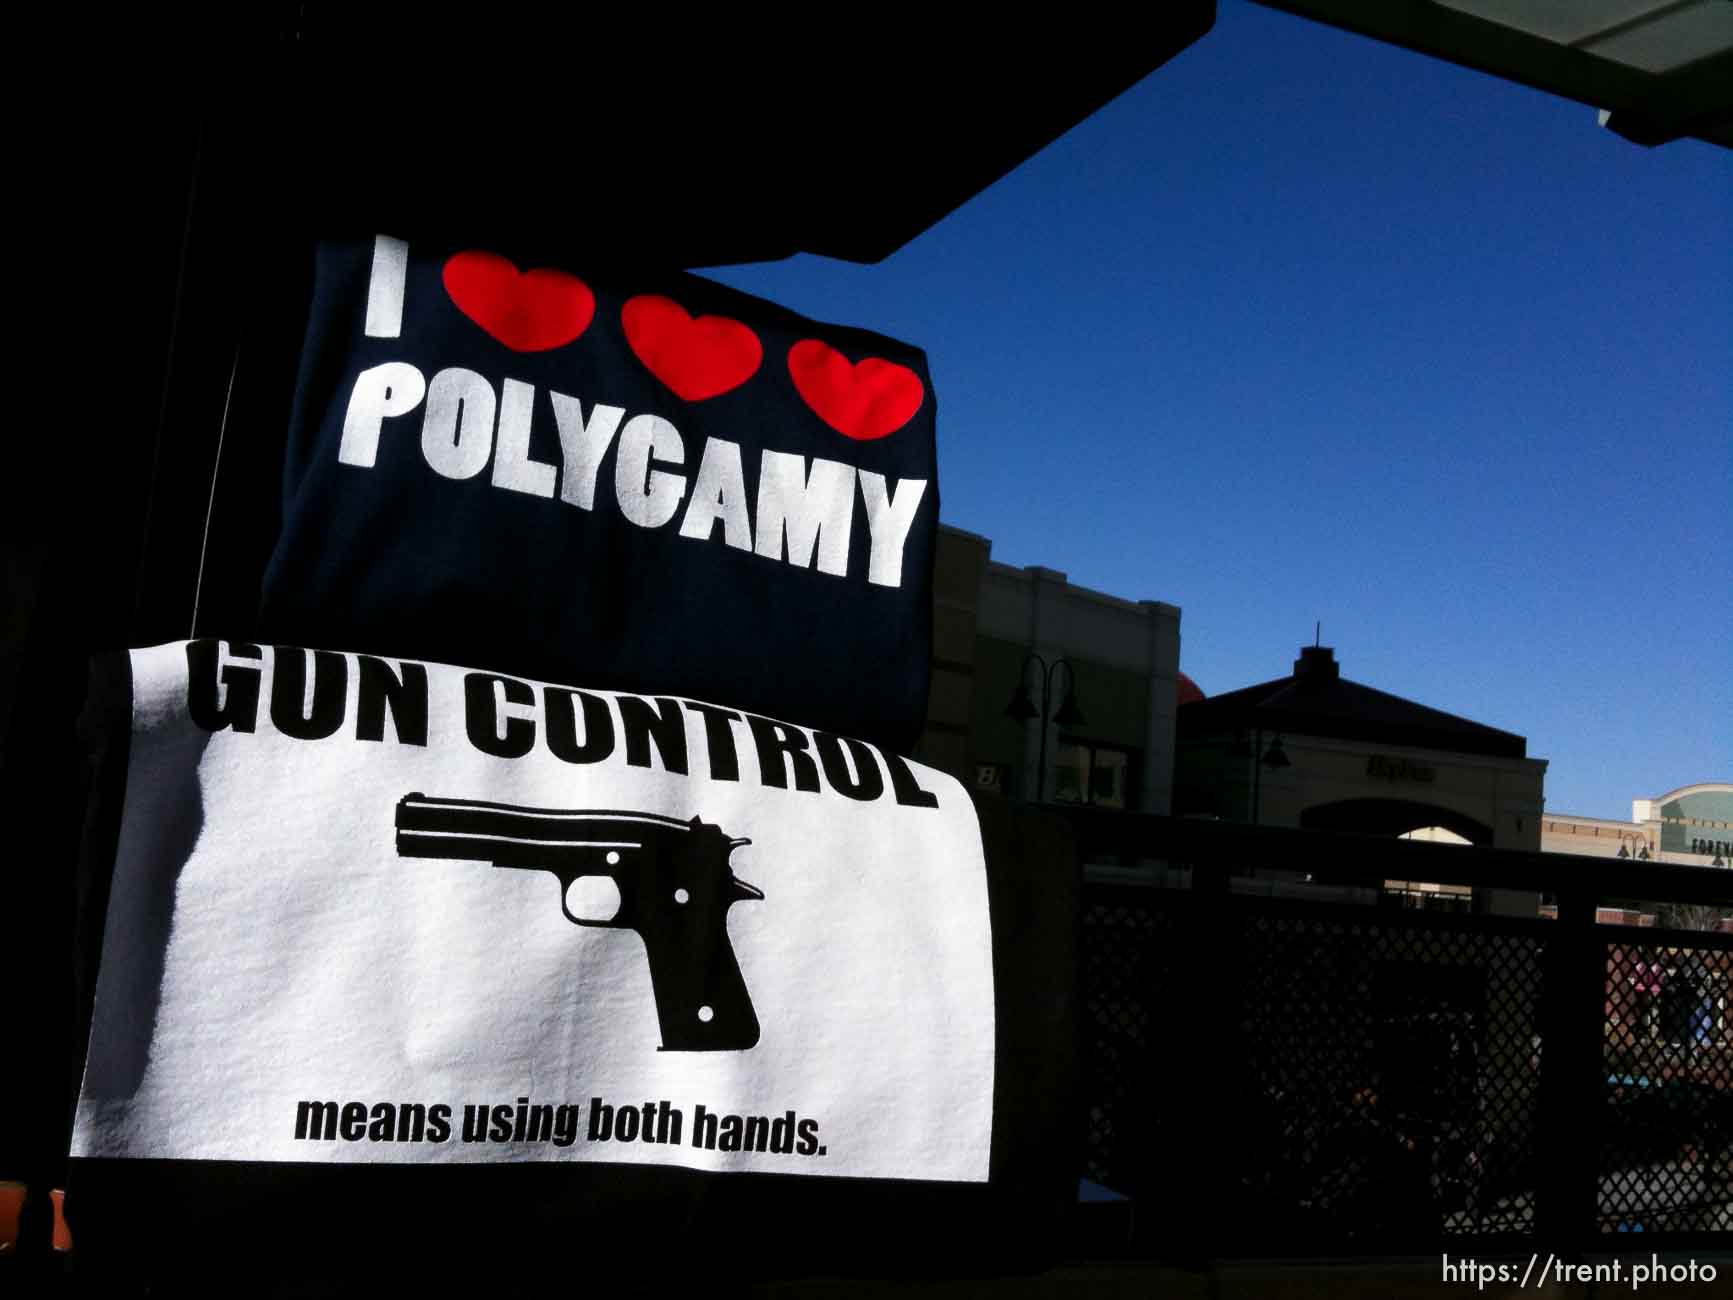 I Love Polygamy | Gun Control means using both hands